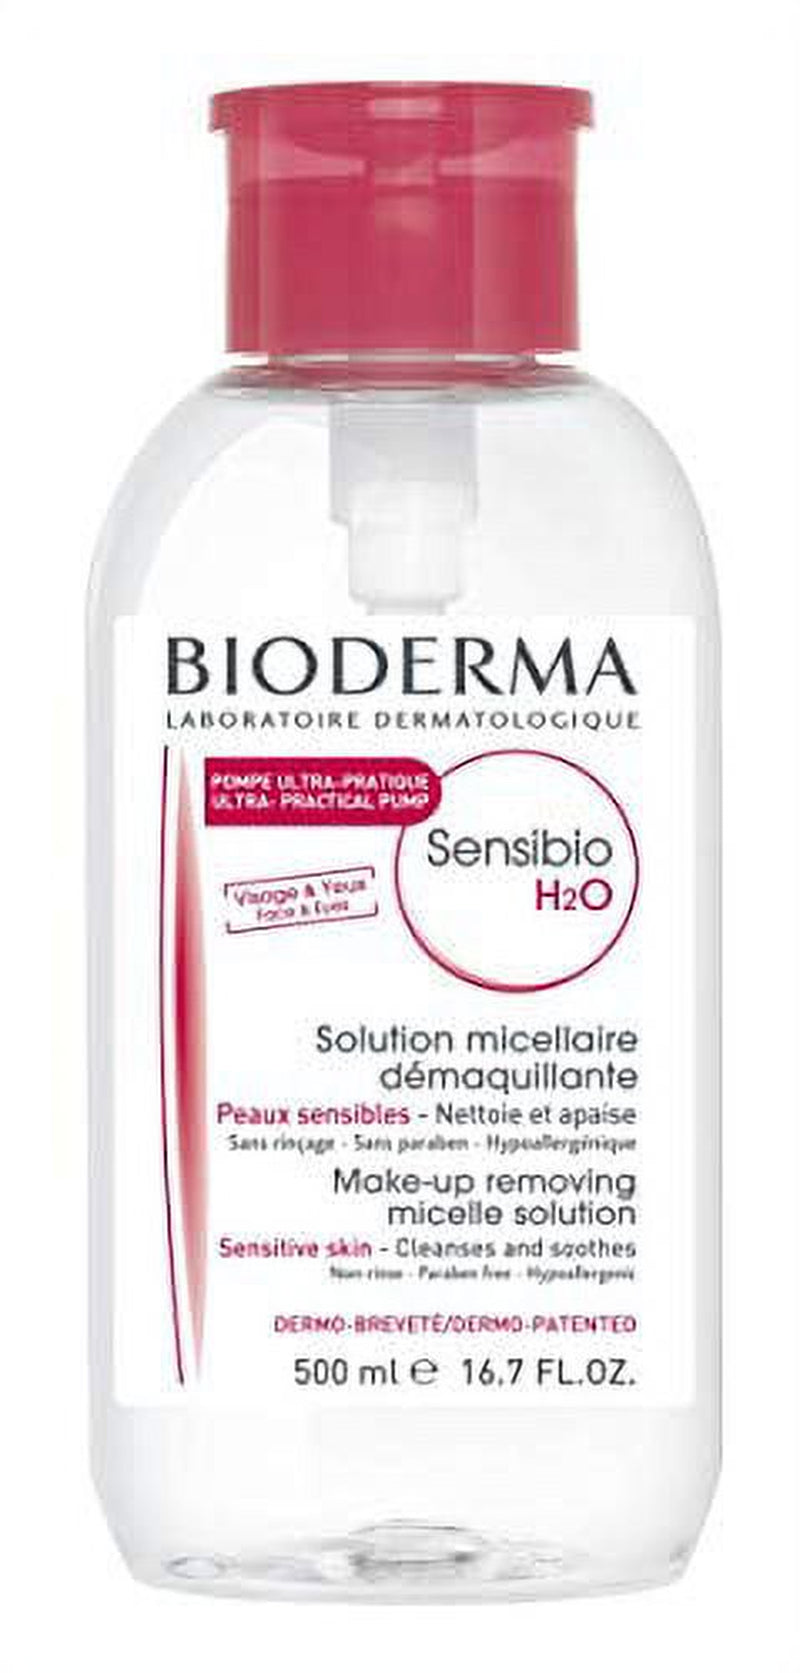 "Sensibio H2O Soothing Micellar Cleansing Water and Makeup Remover for Sensitive Skin - Face and Eyes - 16.7 Fl.Oz. with Convenient Reversed Pump"